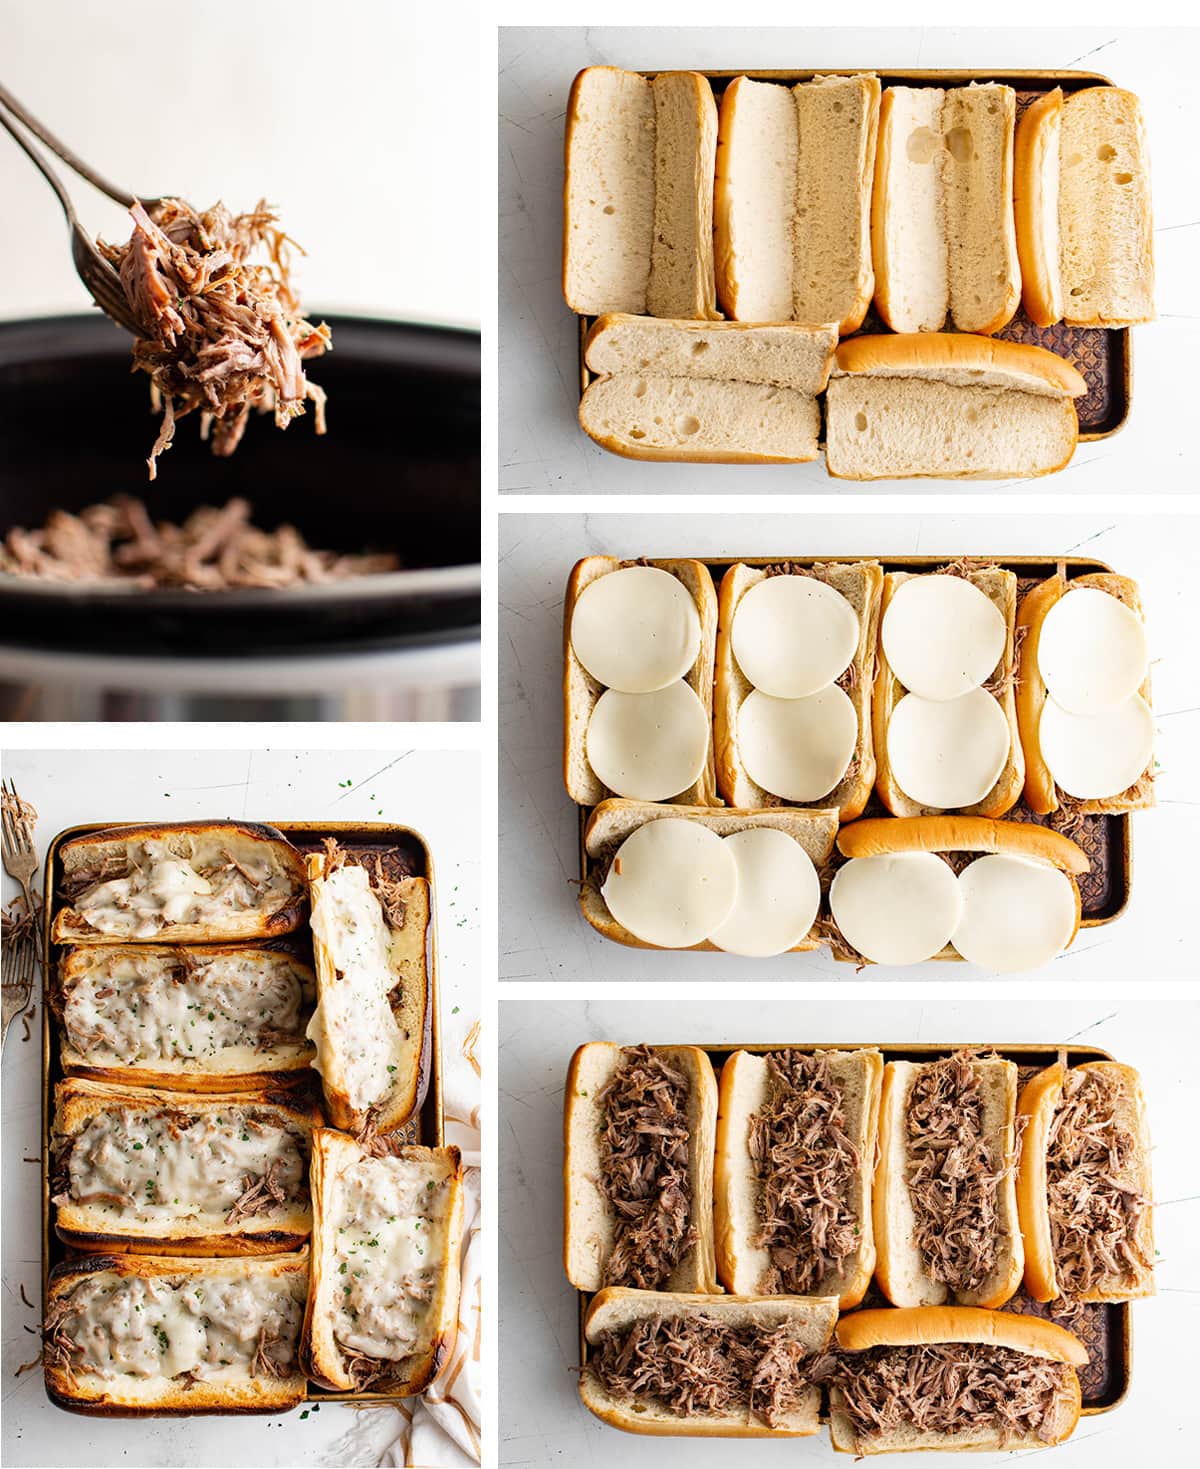 Collage of images showing how to assemble beef sandwiches.